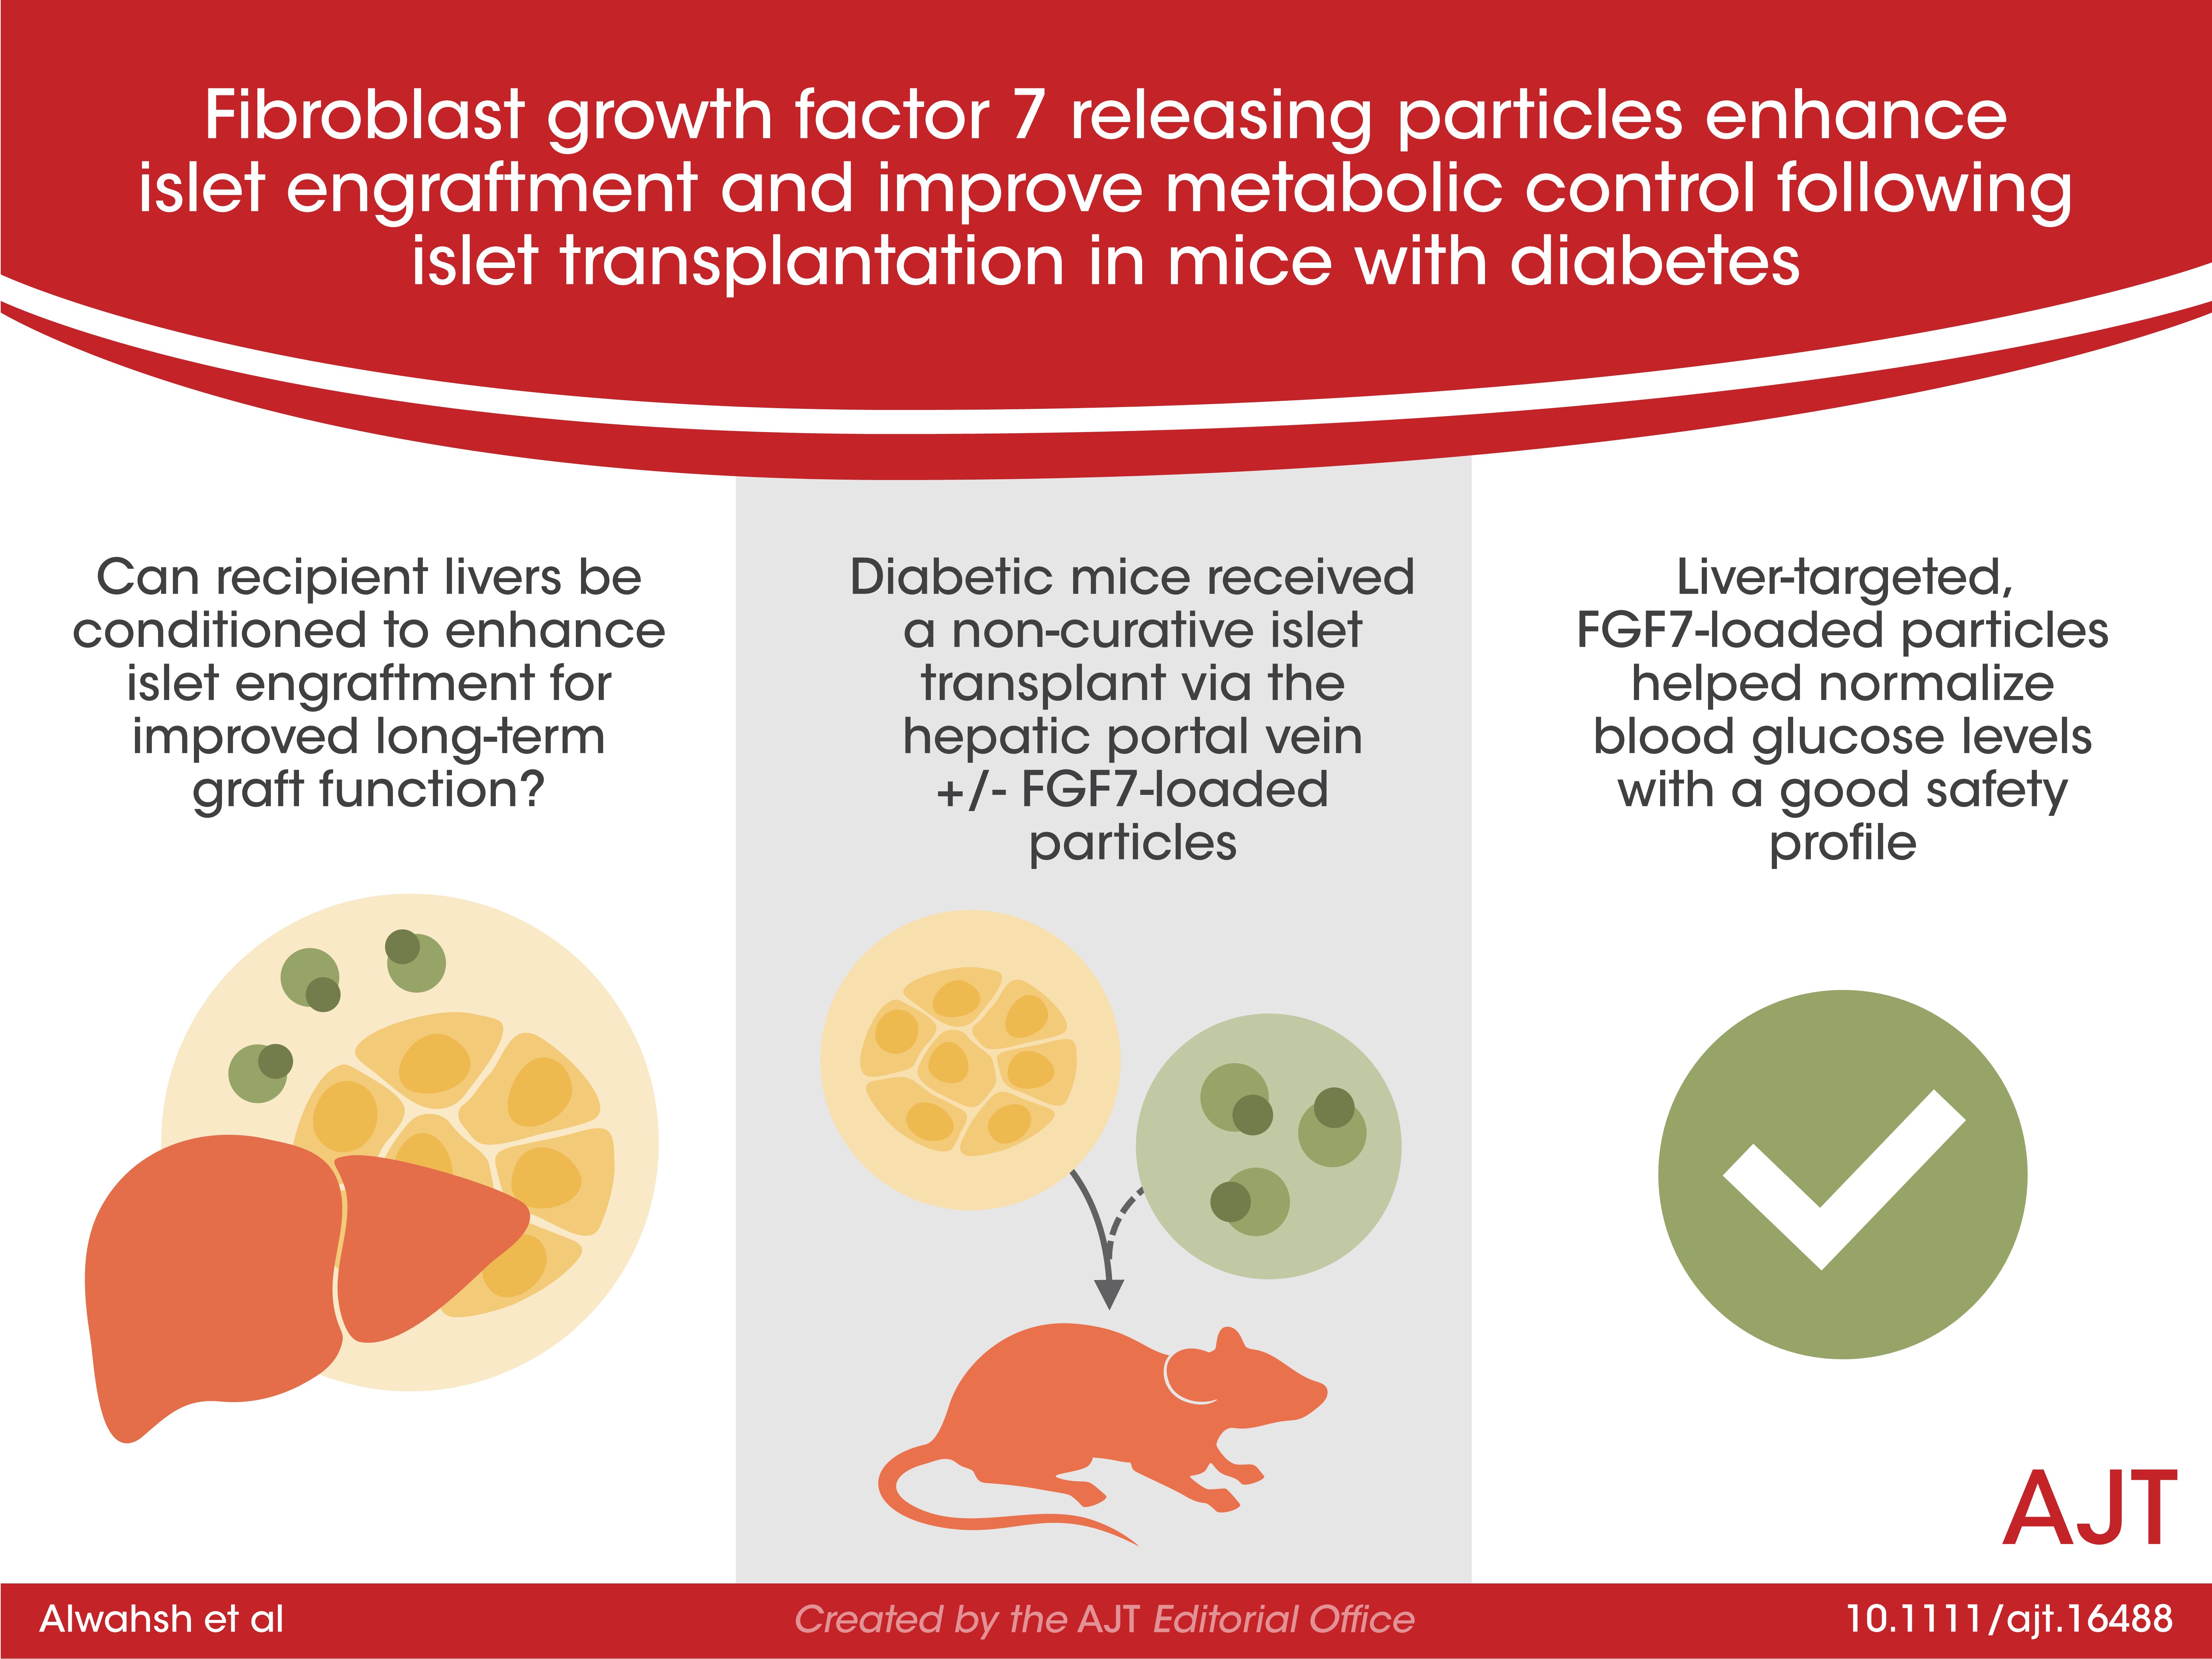 Fibroblast growth factor 7 releasing particles enhance islet engraftment and improve metabolic control following islet transplan